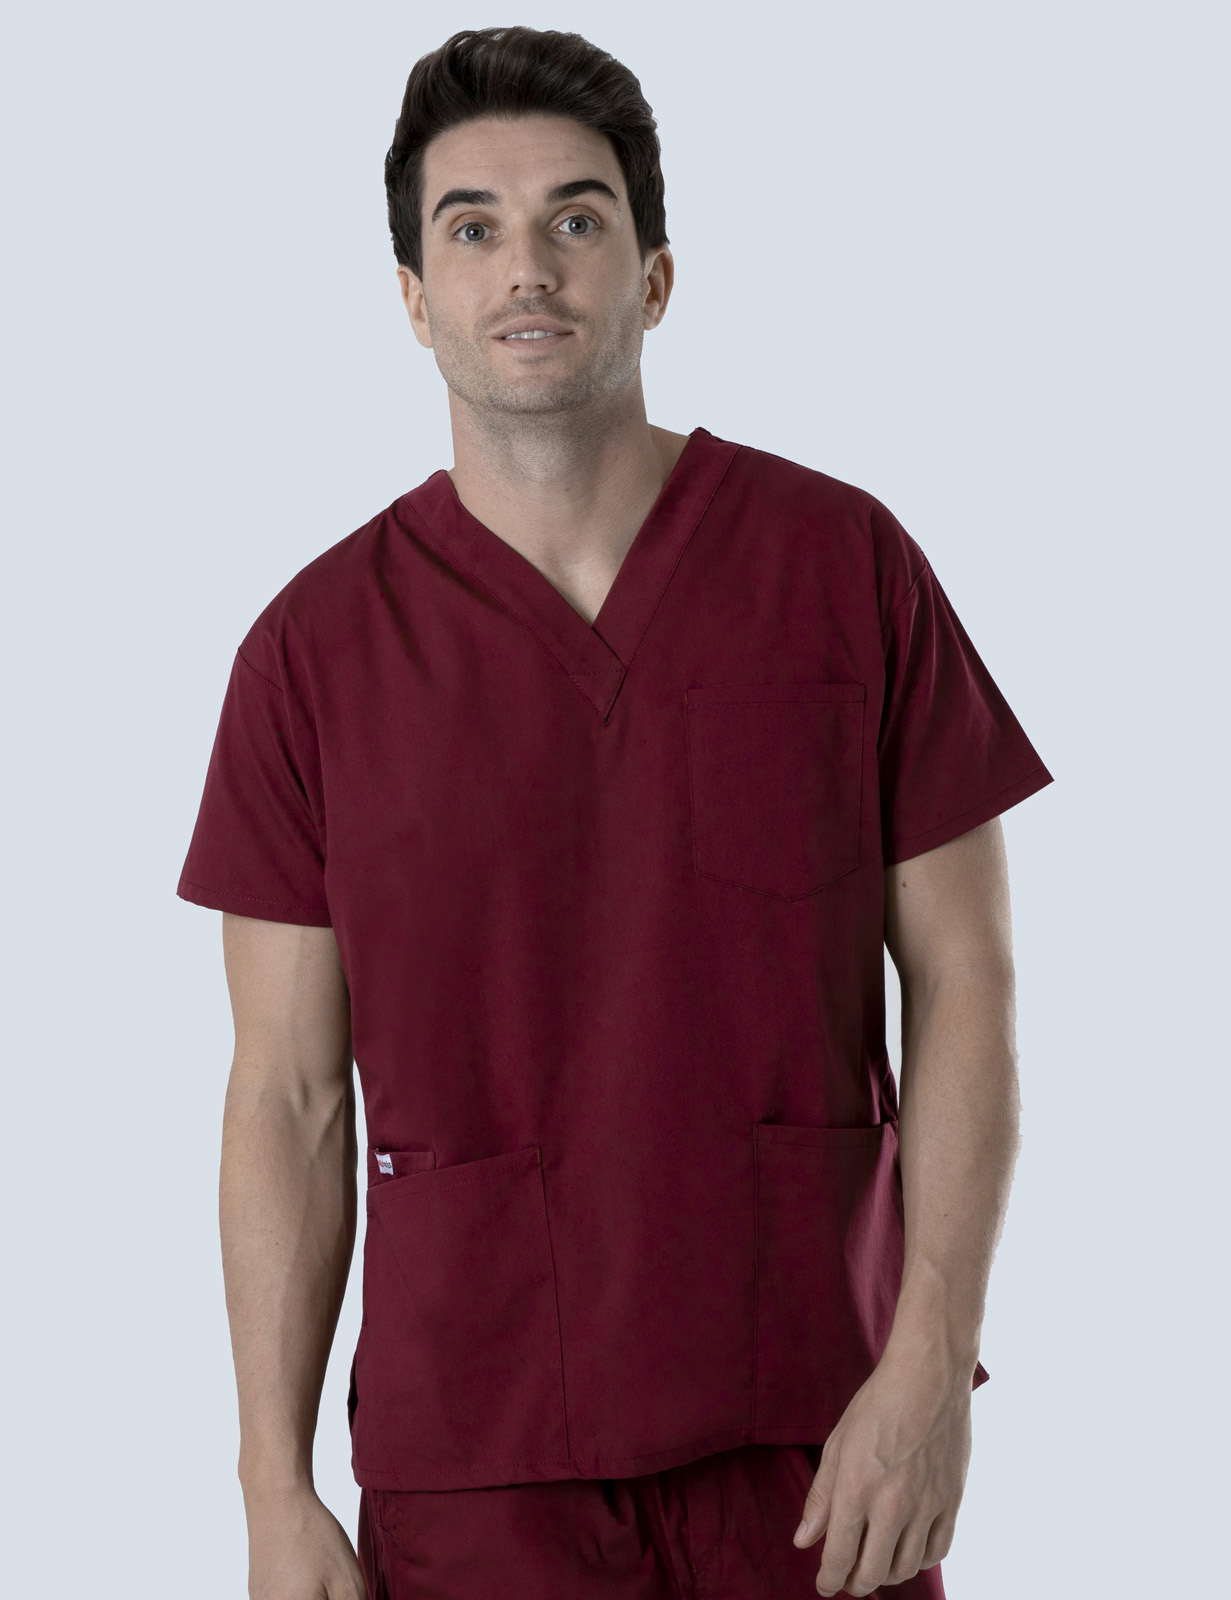 Fremantle Hospital - Occupational Therapy (4 Pocket Scrub Top in Burgundy incl Logos)